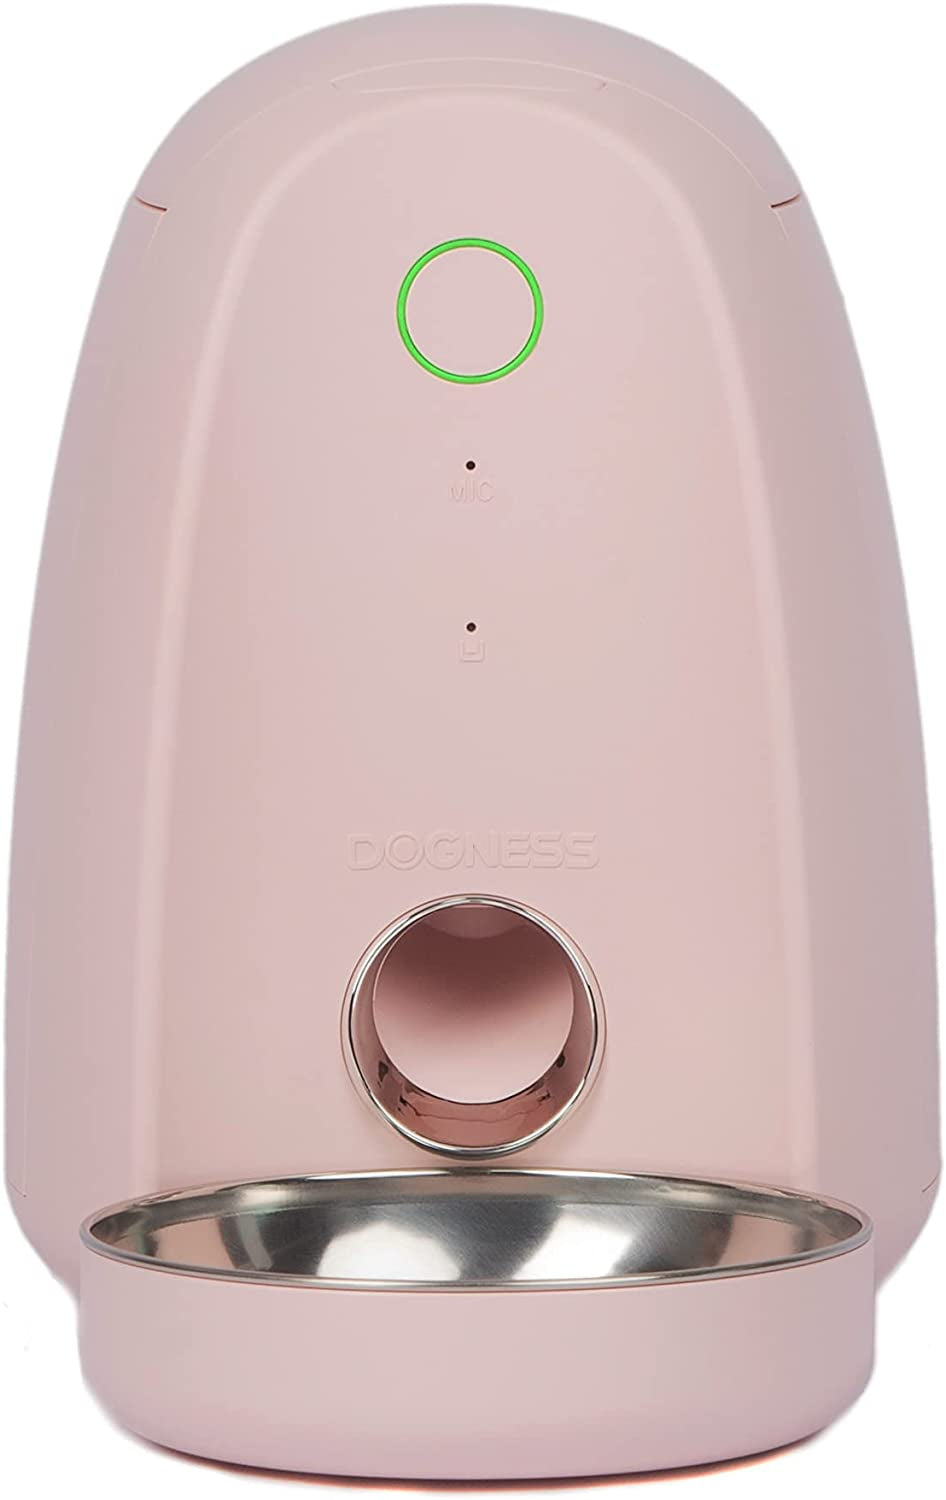 Wi-Fi Automatic Enabled Pet Feeder